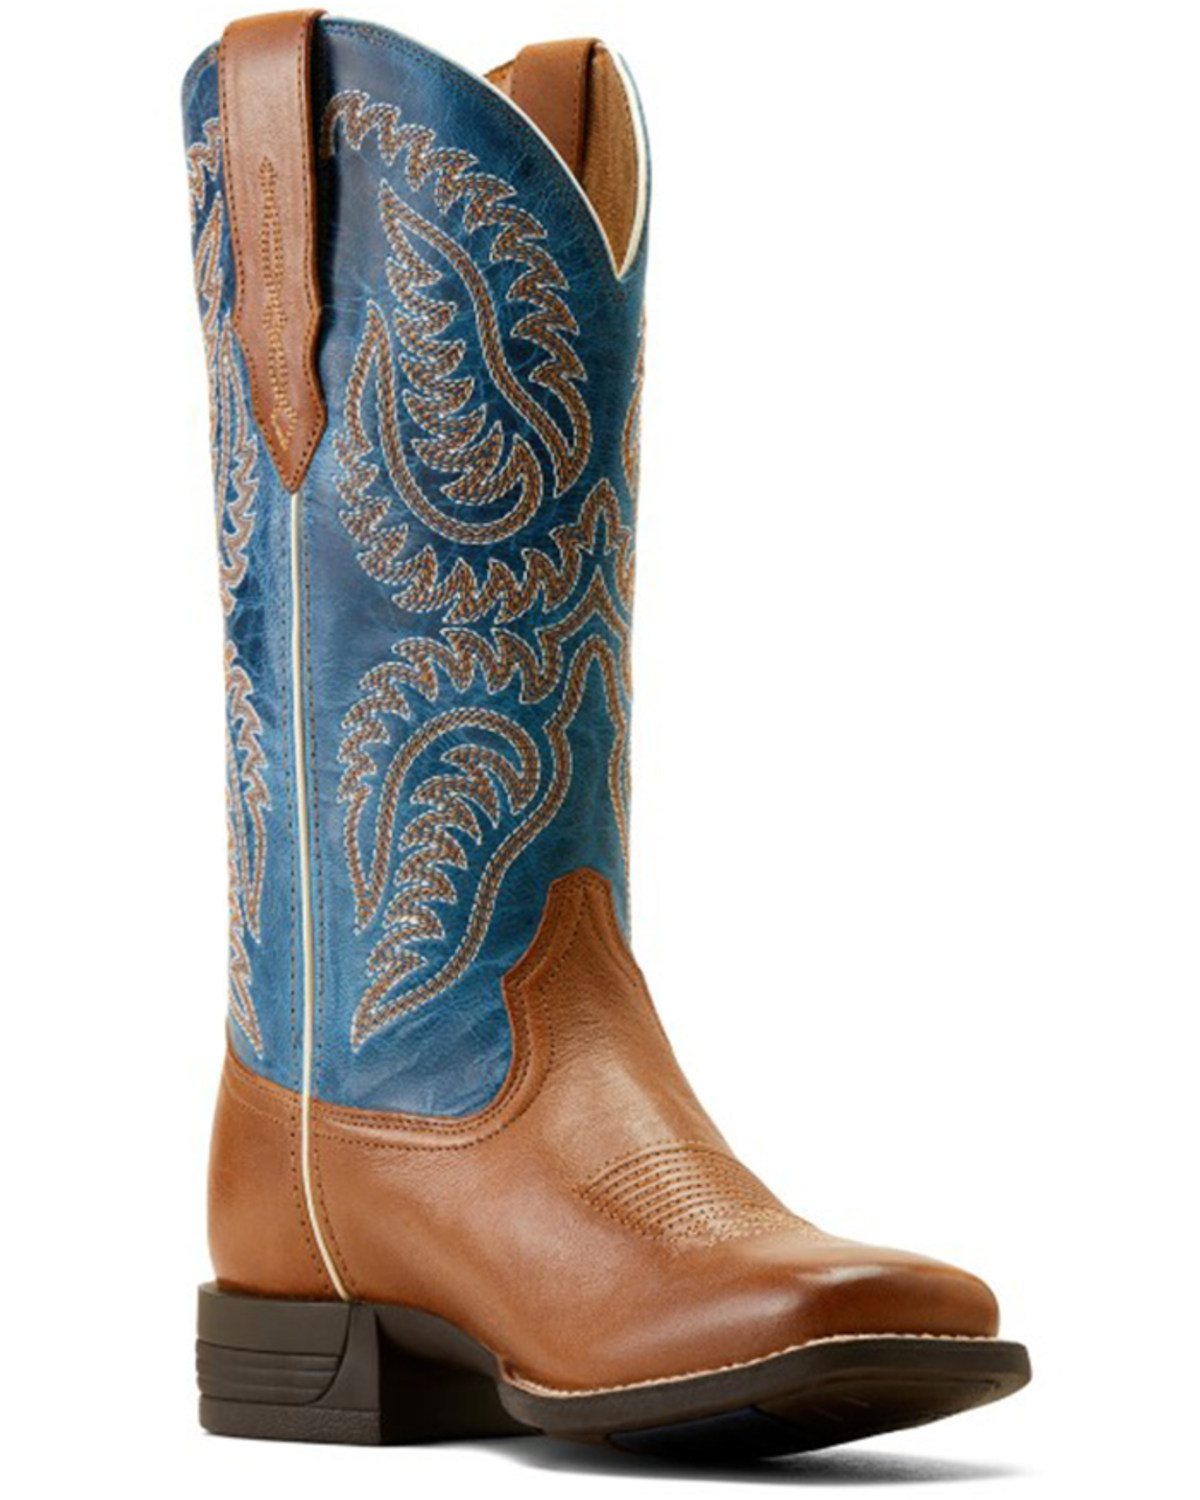 Ariat Women's Cattle Caite StretchFit Performance Western Boots - Broad Square Toe